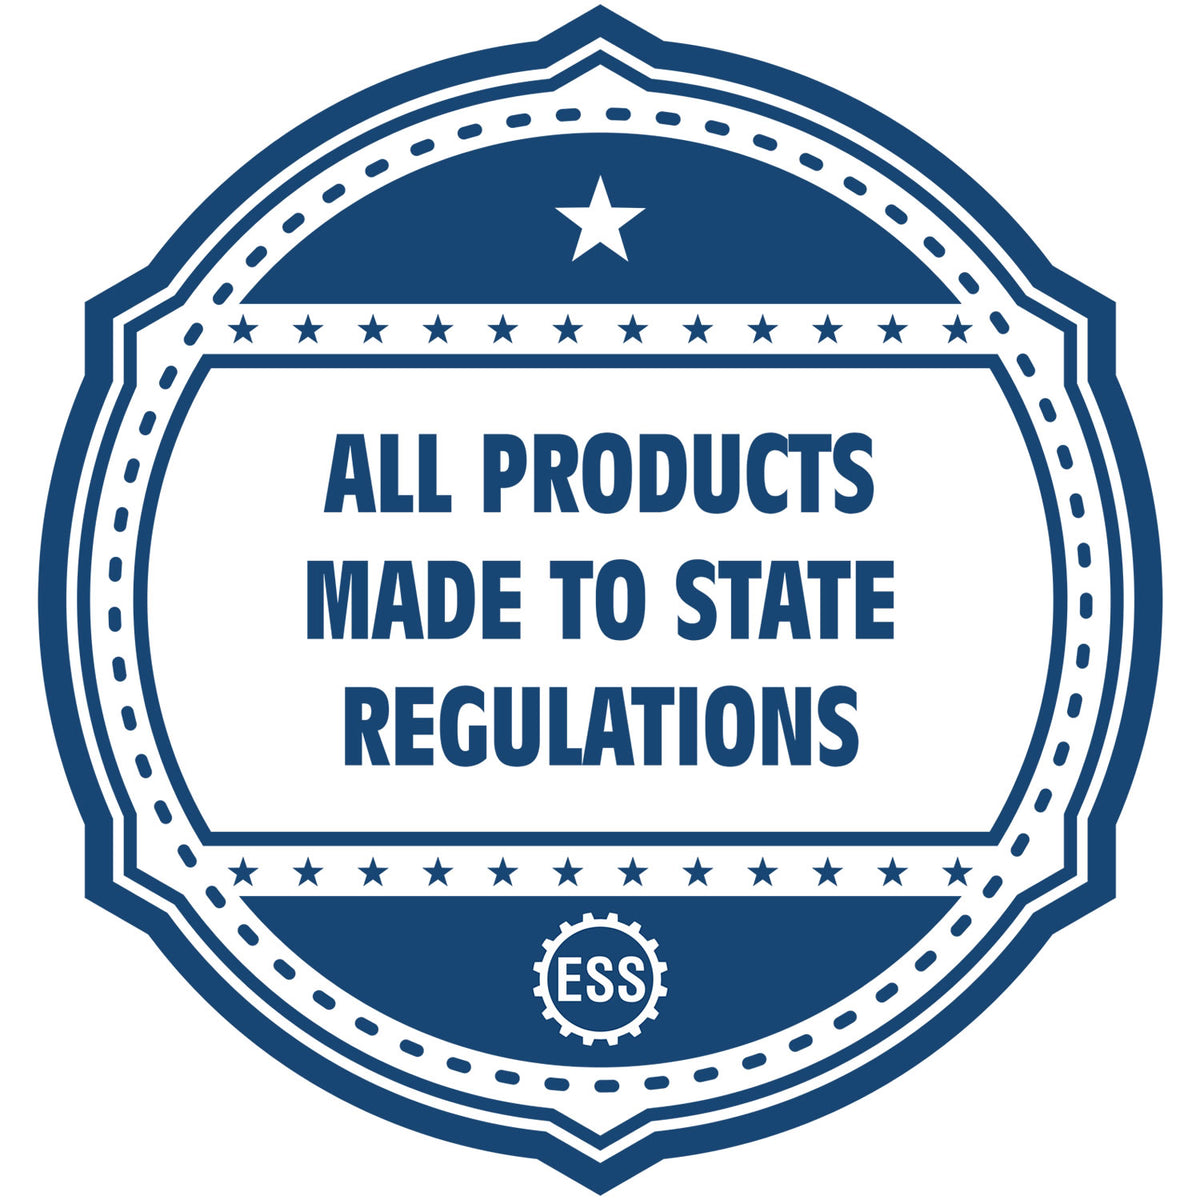 An icon or badge element for the Slim Pre-Inked Nebraska Architect Seal Stamp showing that this product is made in compliance with state regulations.